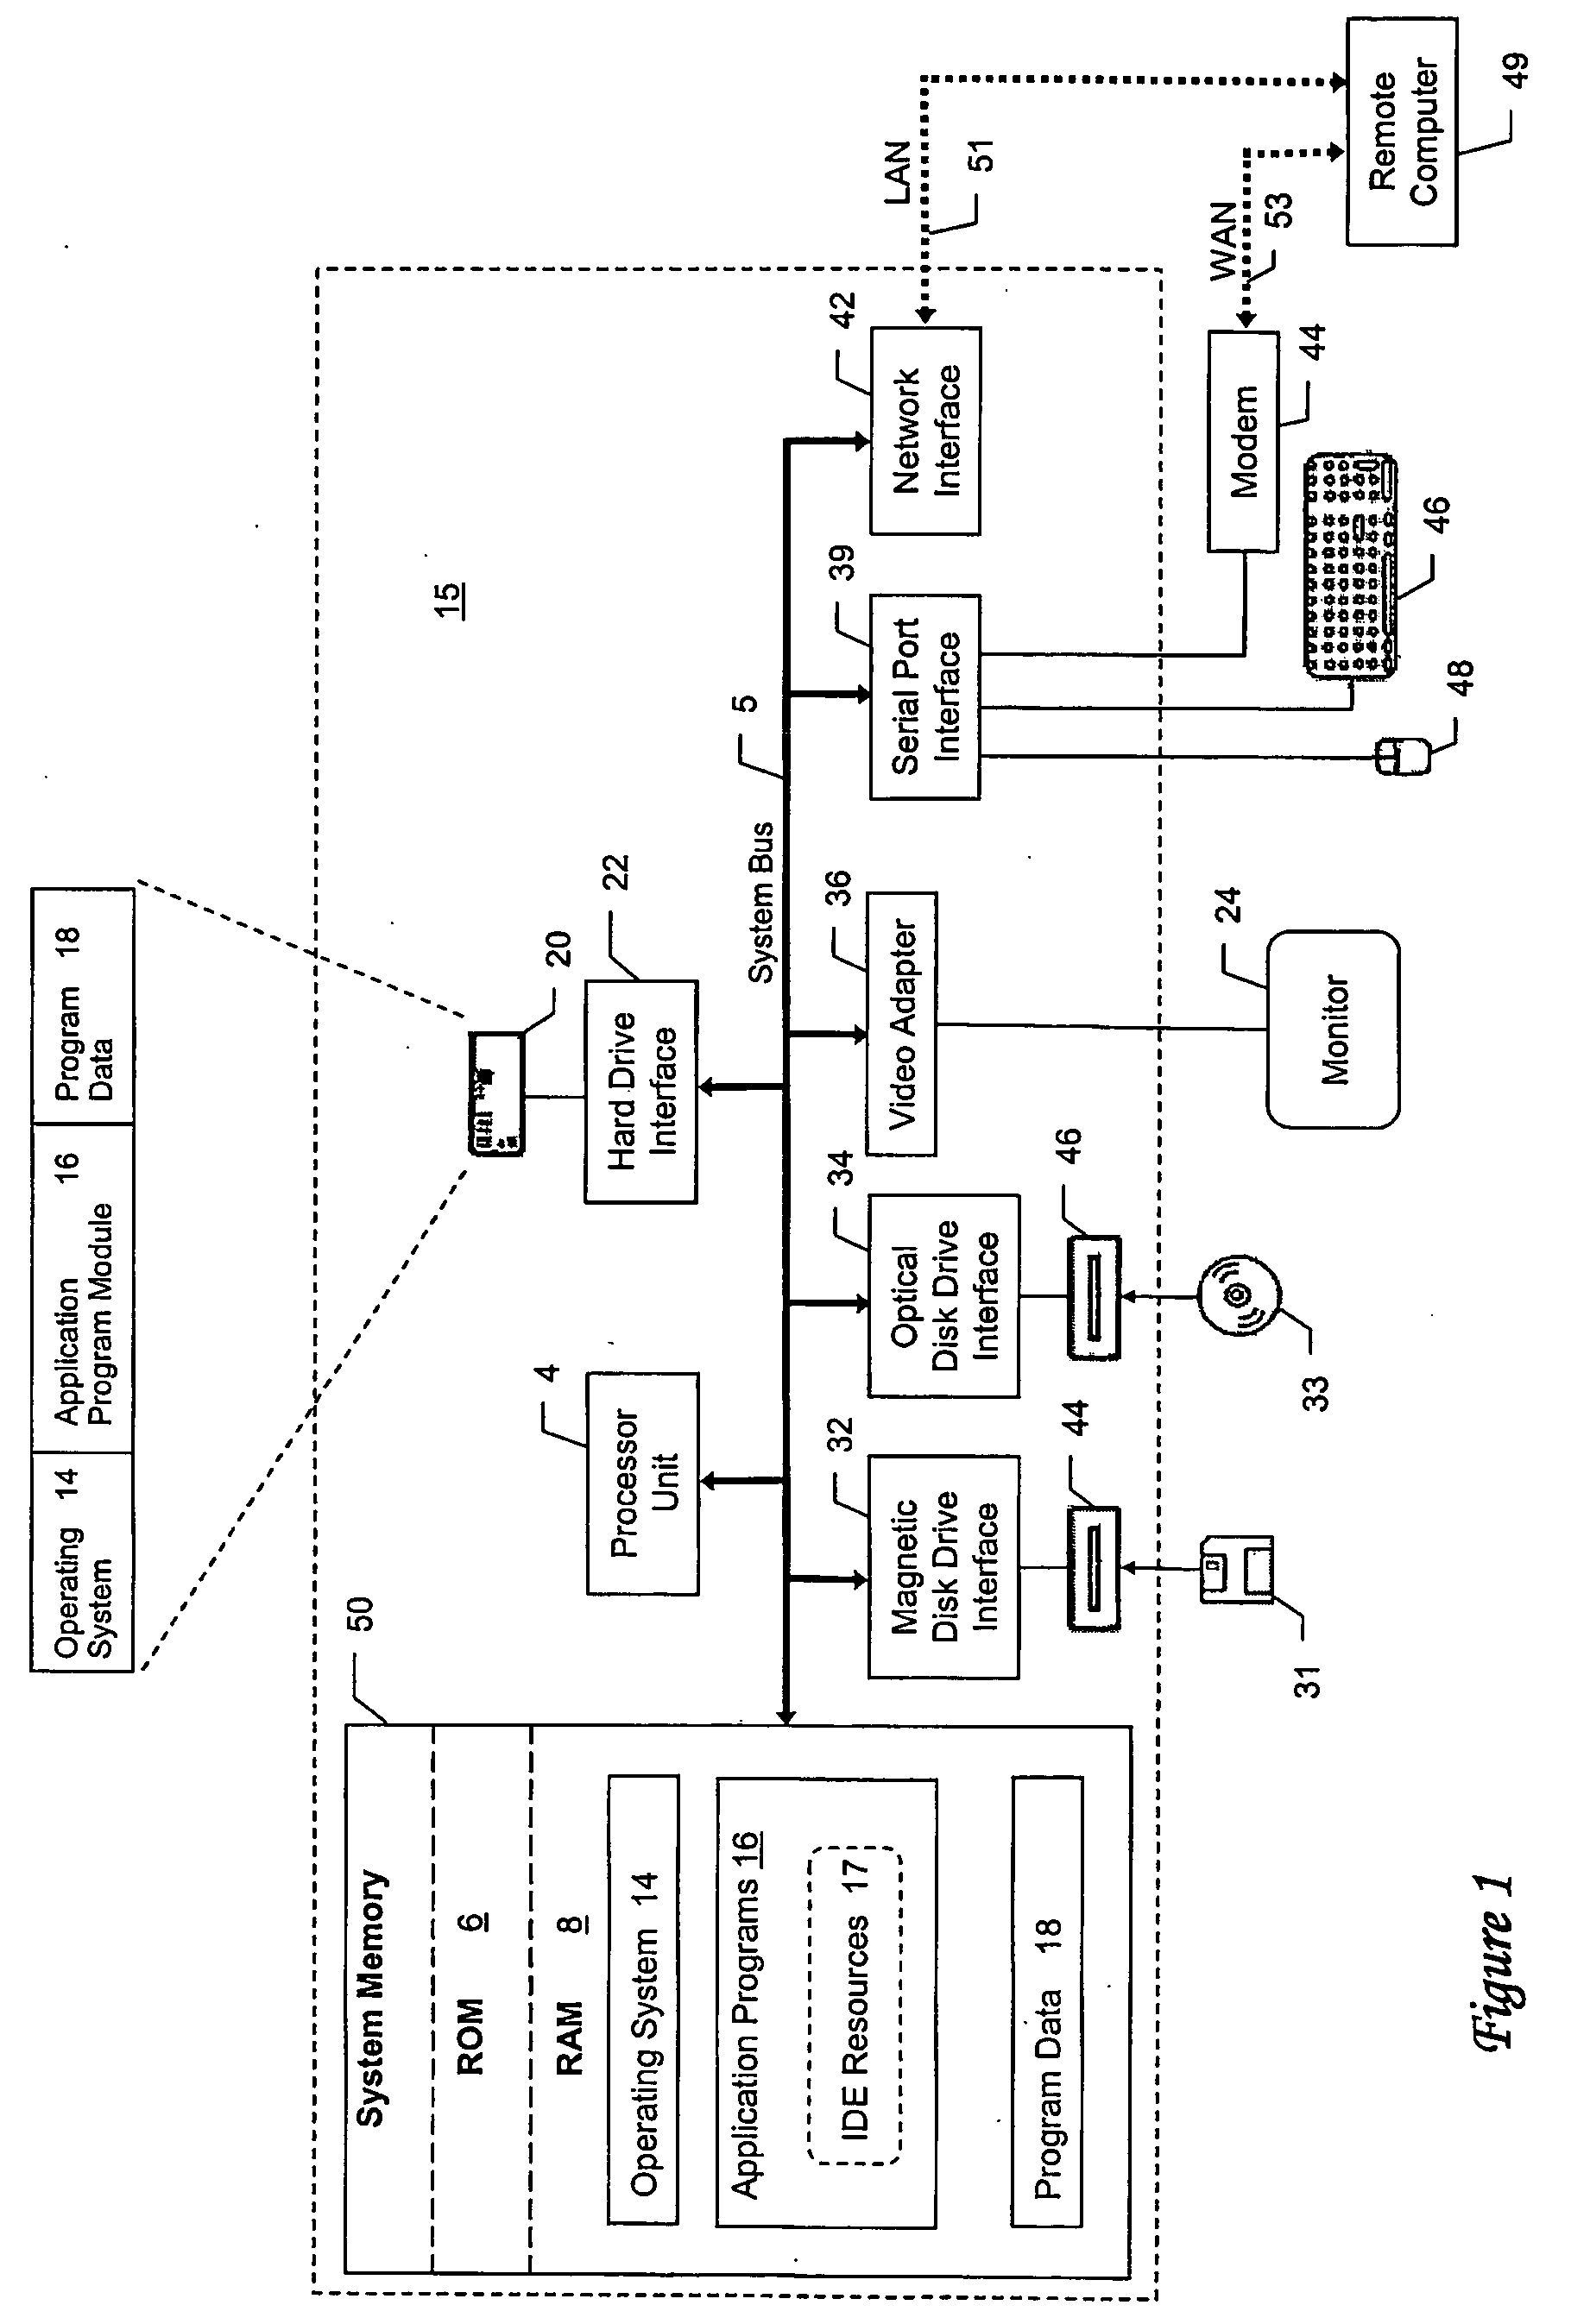 System and method for contributing remote object content to an integrated development environment type-ahead